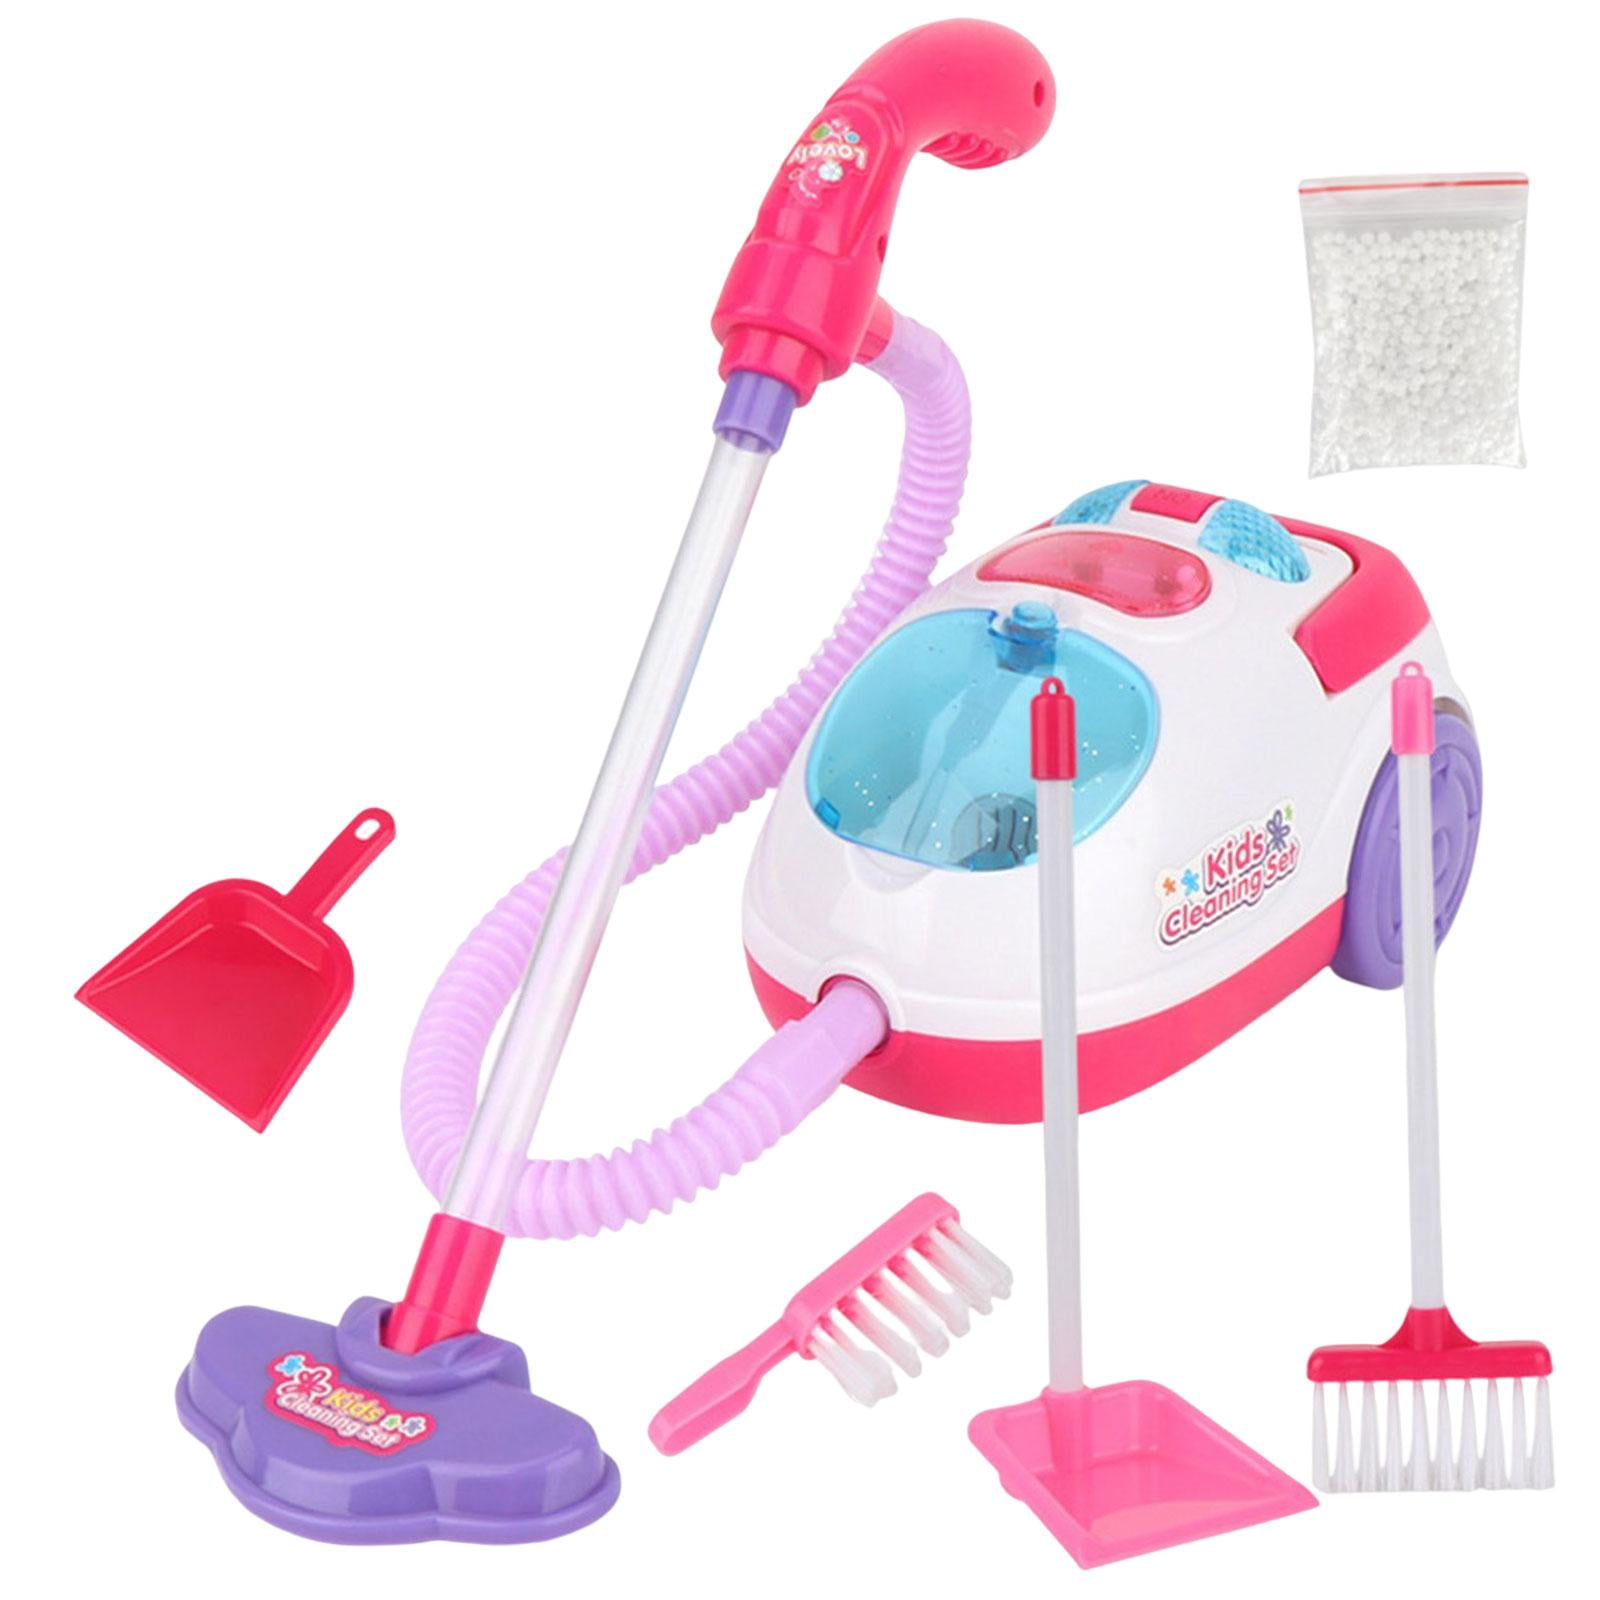 Kids Hoover Cleaning Accessory Set Trolley Pretend Role Play Toy Girls Gift Pink 